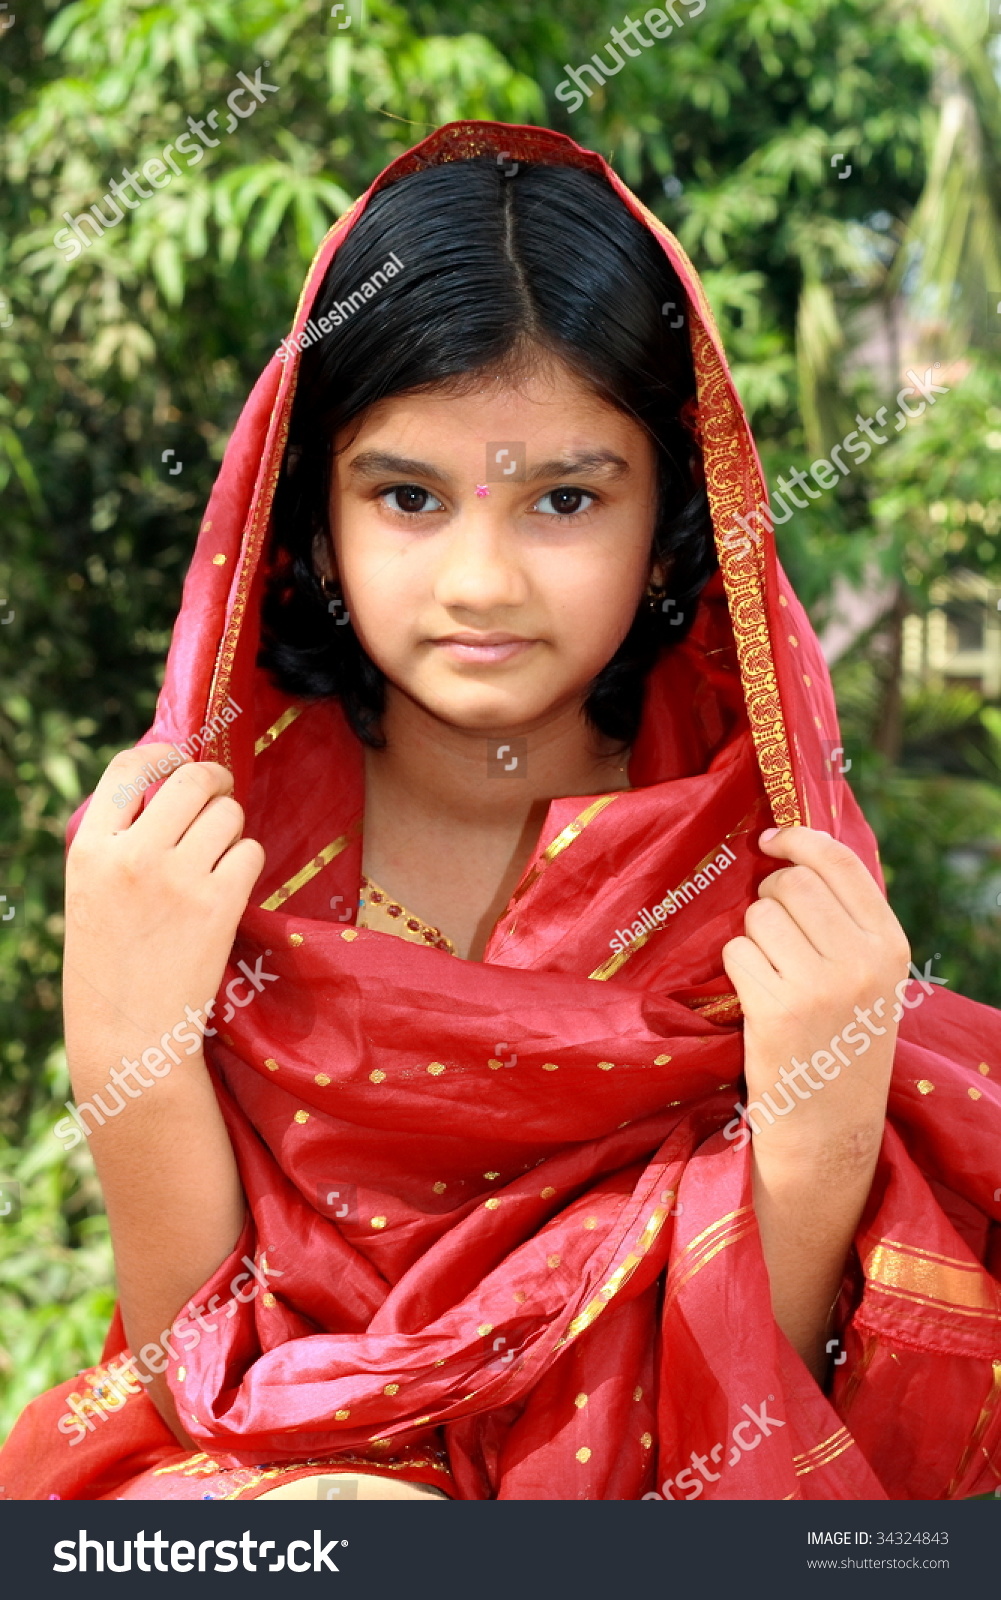 Traditional Indian Girl Stock Photo 34324843 : Shutterstock